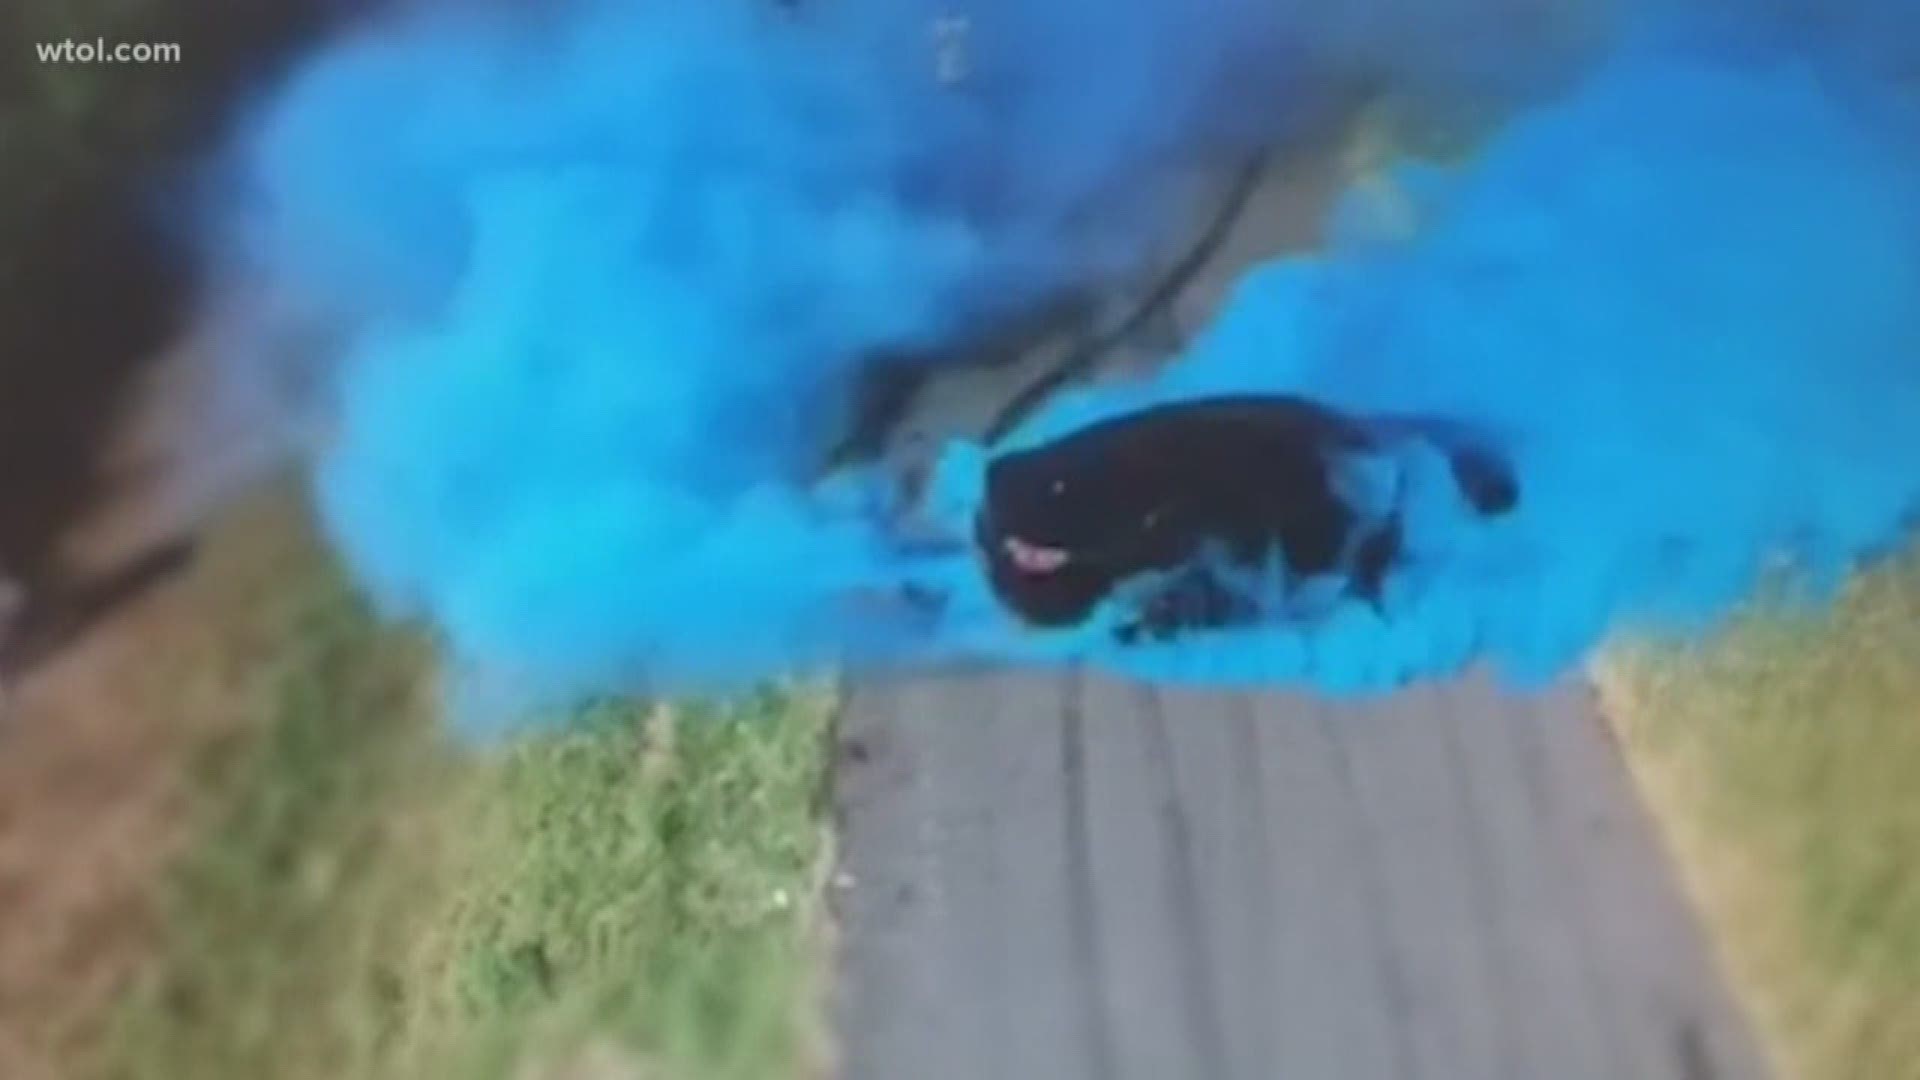 A car in Australia caught fire during a gender reveal.